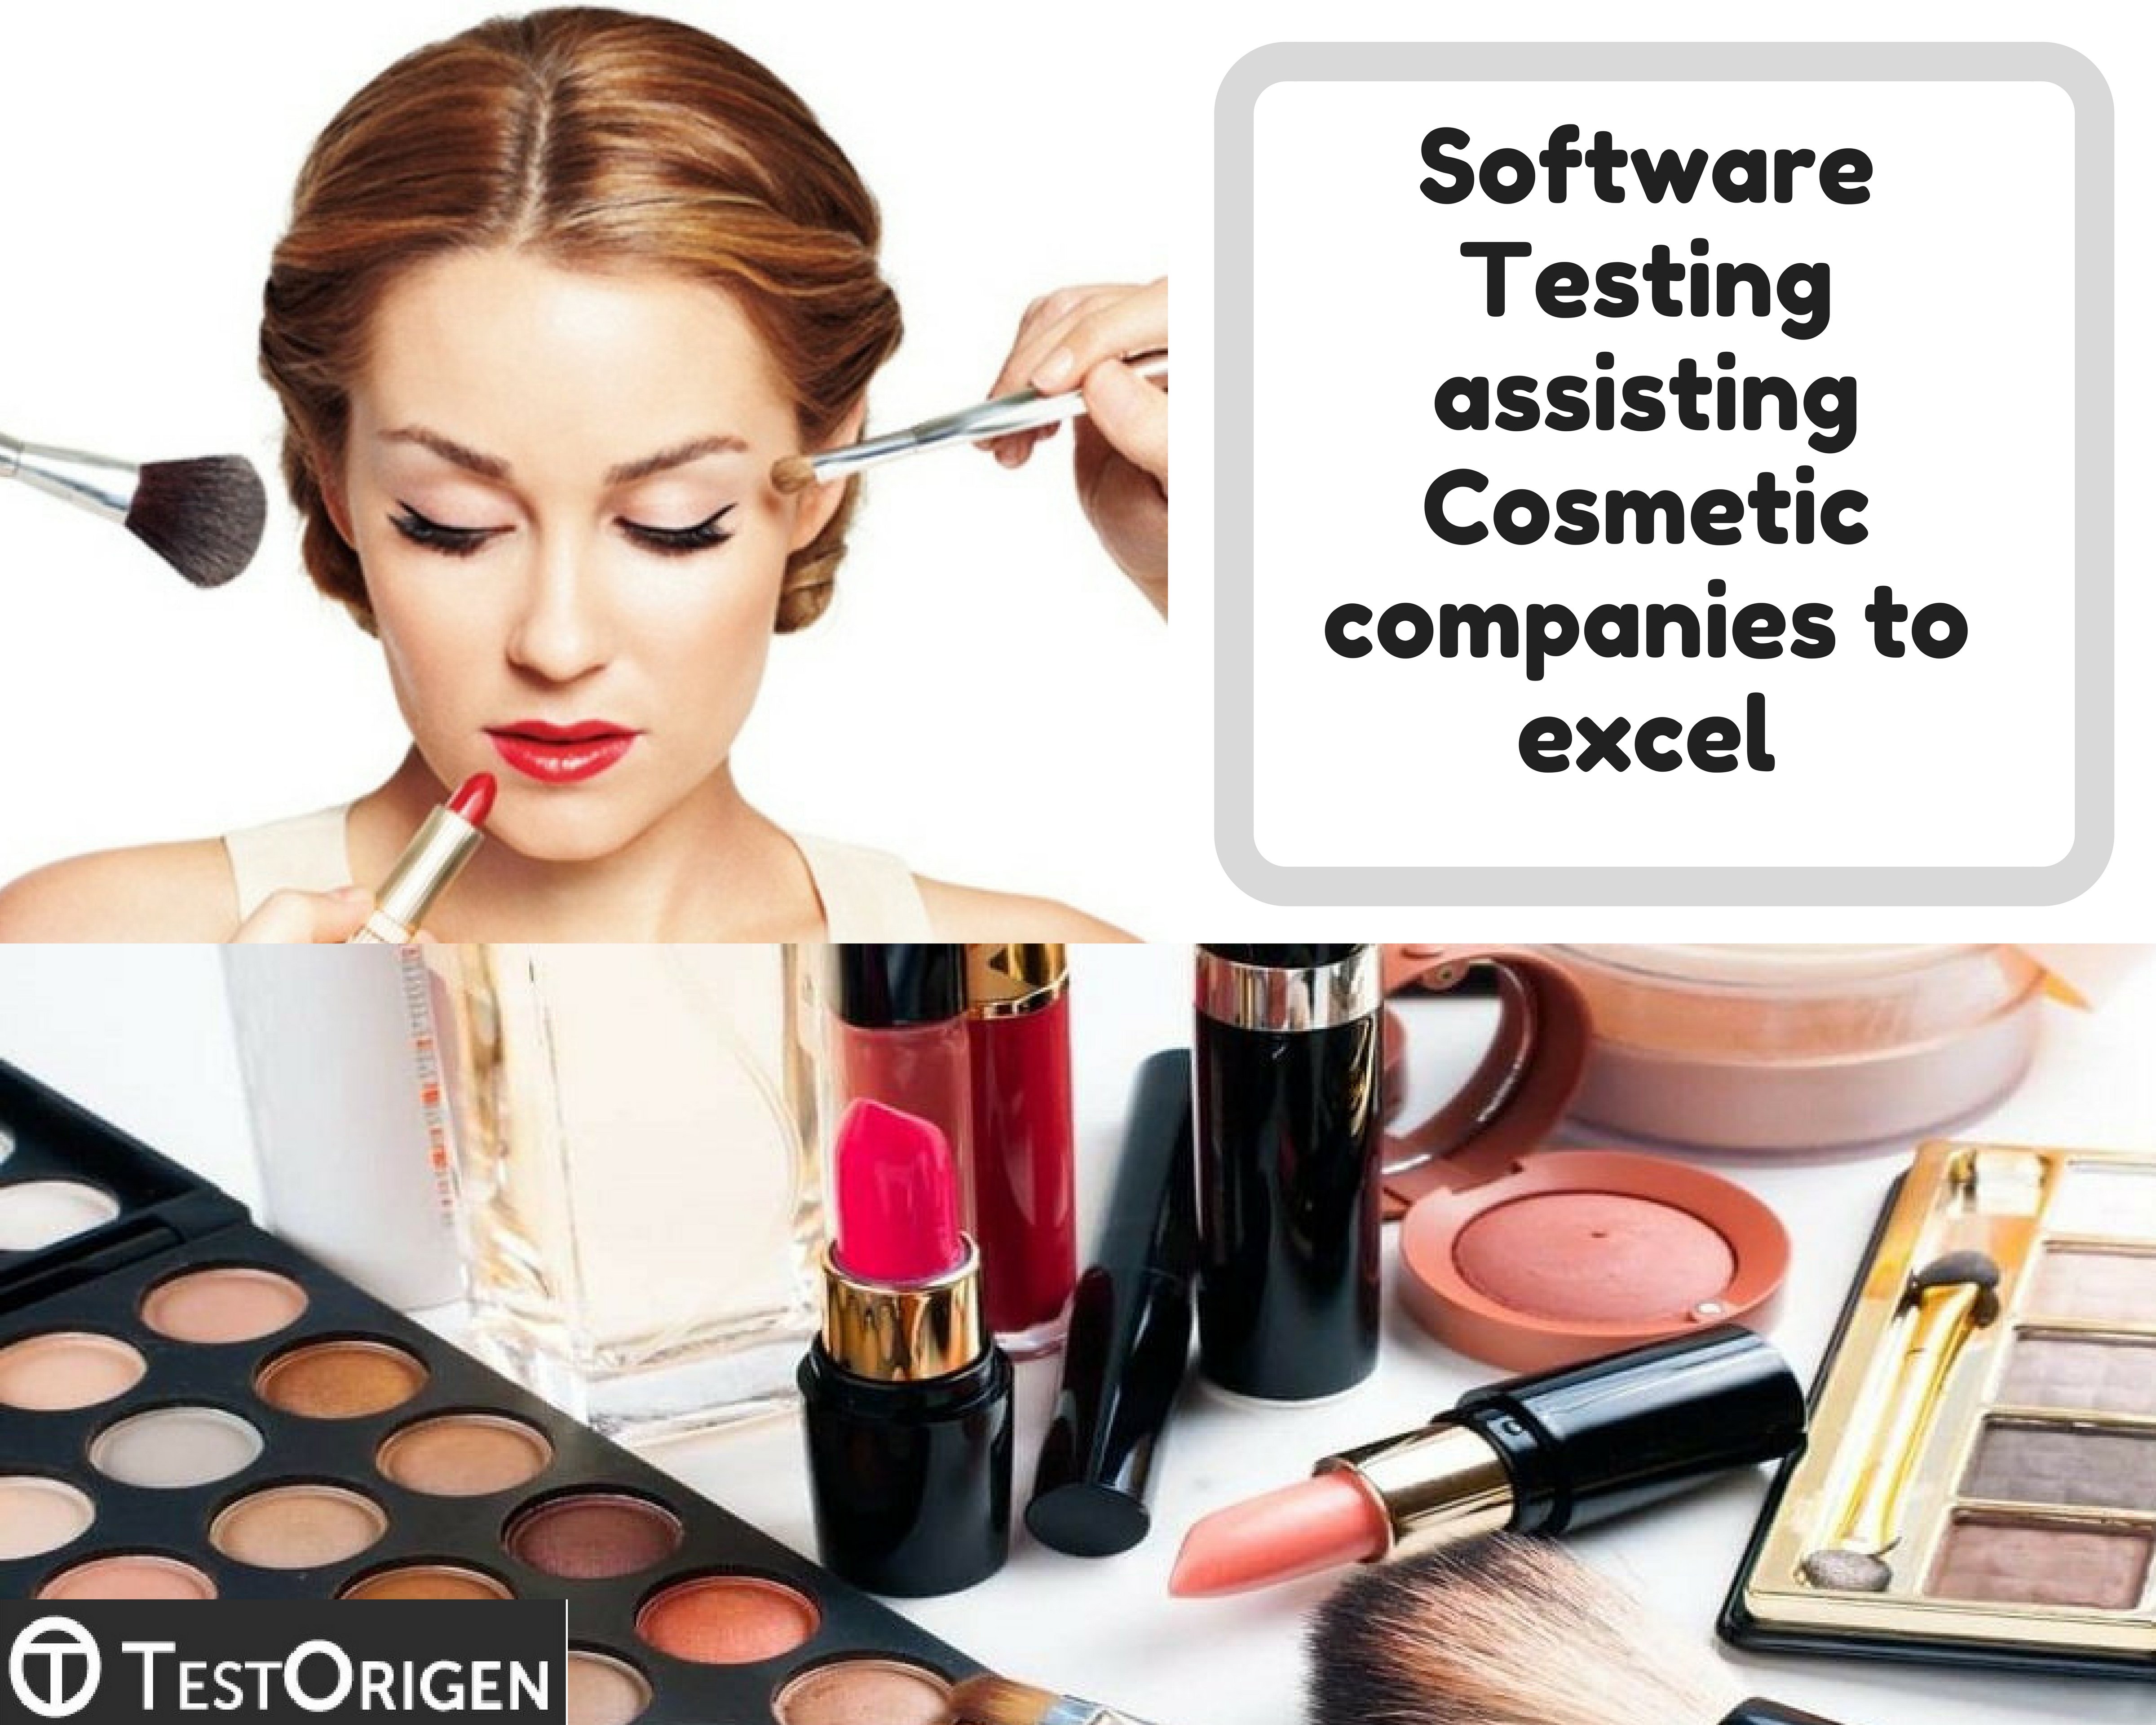 Software Testing assisting Cosmetic companies to excel